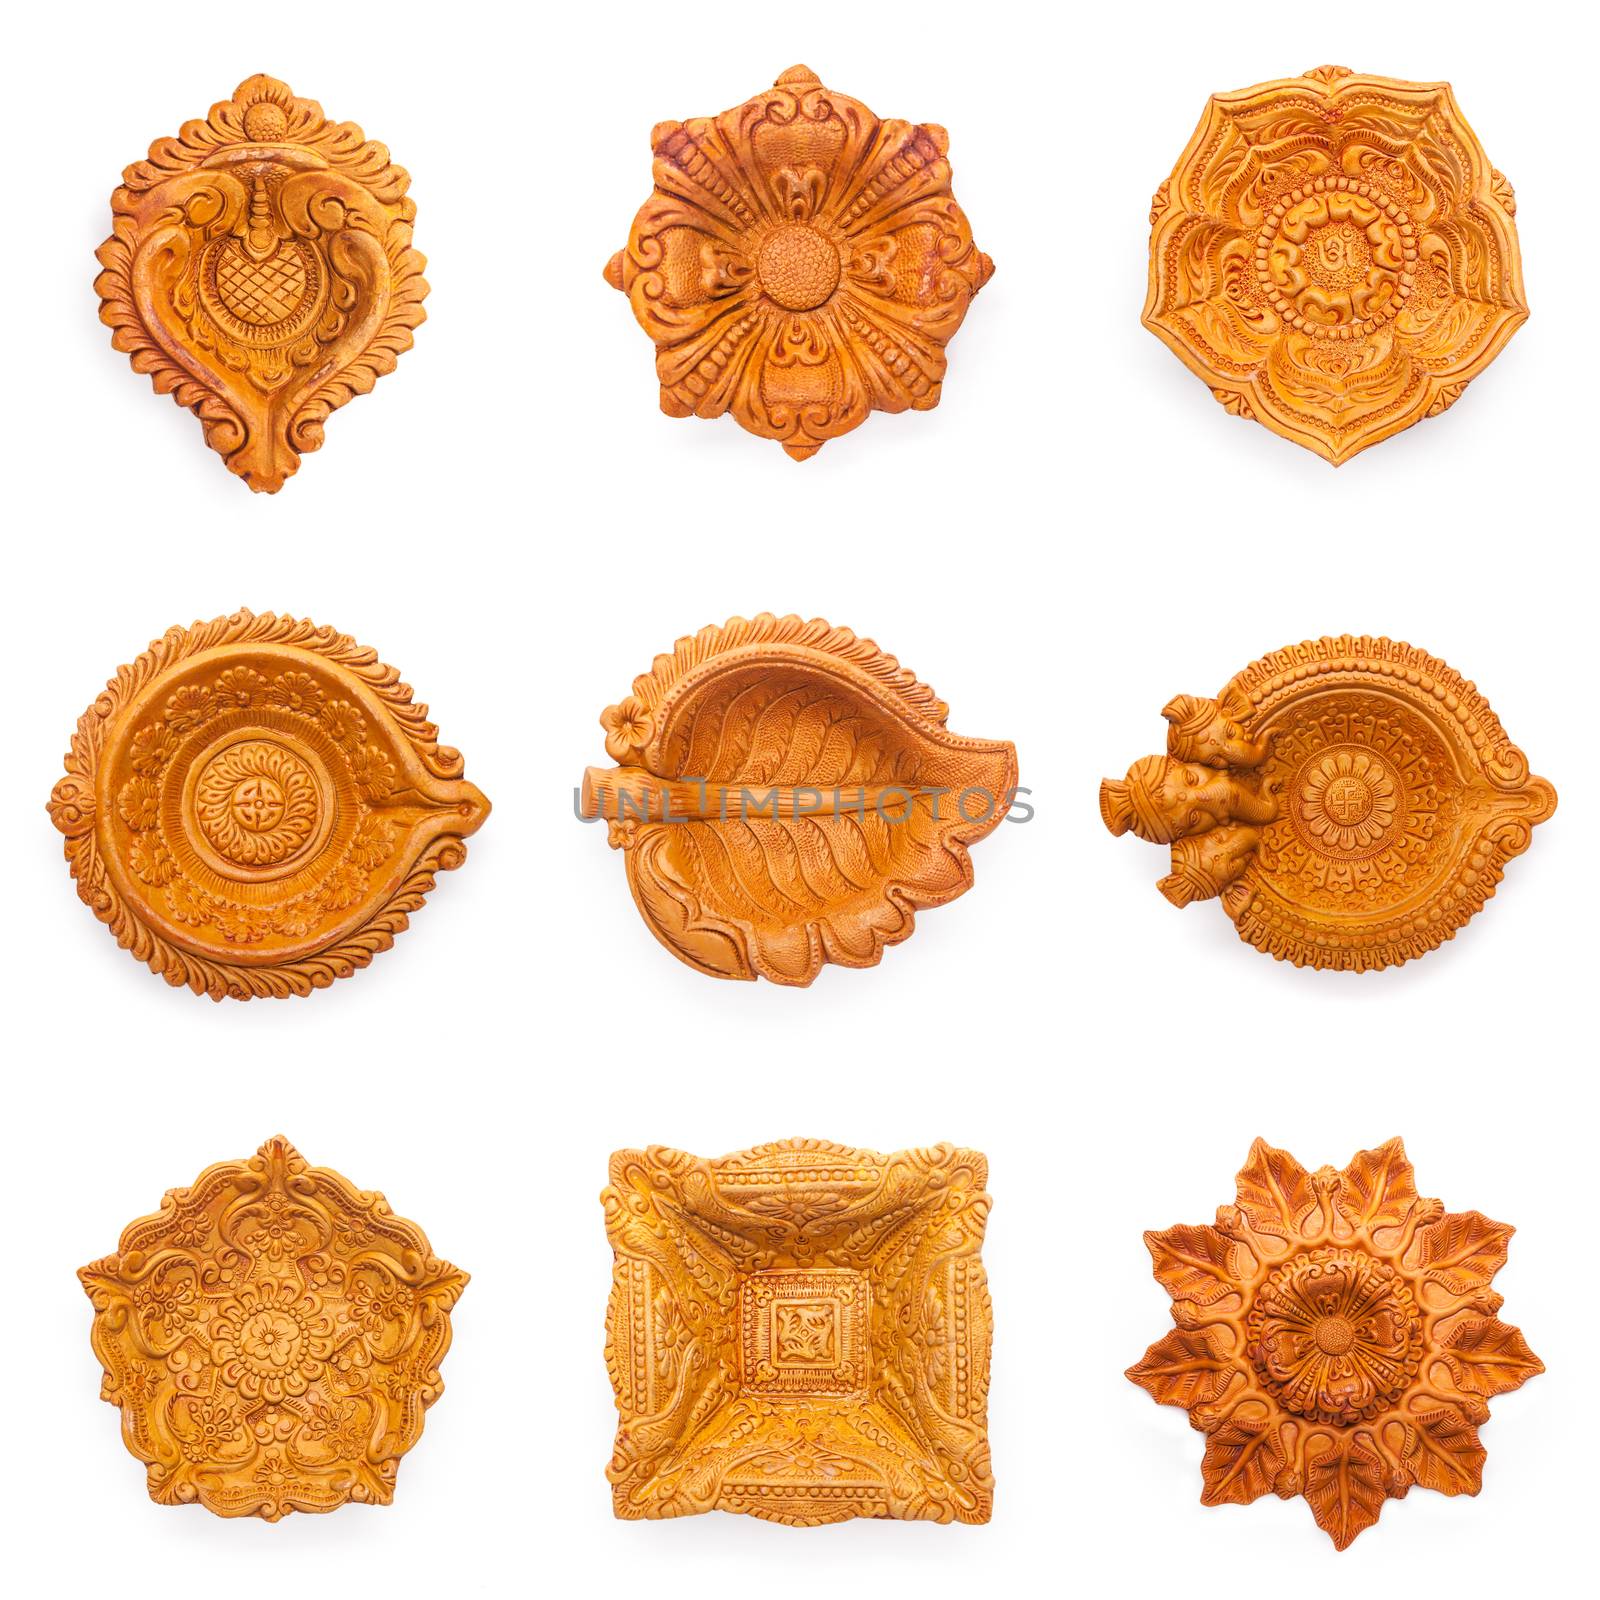 Top view Collage of beautifully carved designer different types of handmade clay lamps isolated on white background.